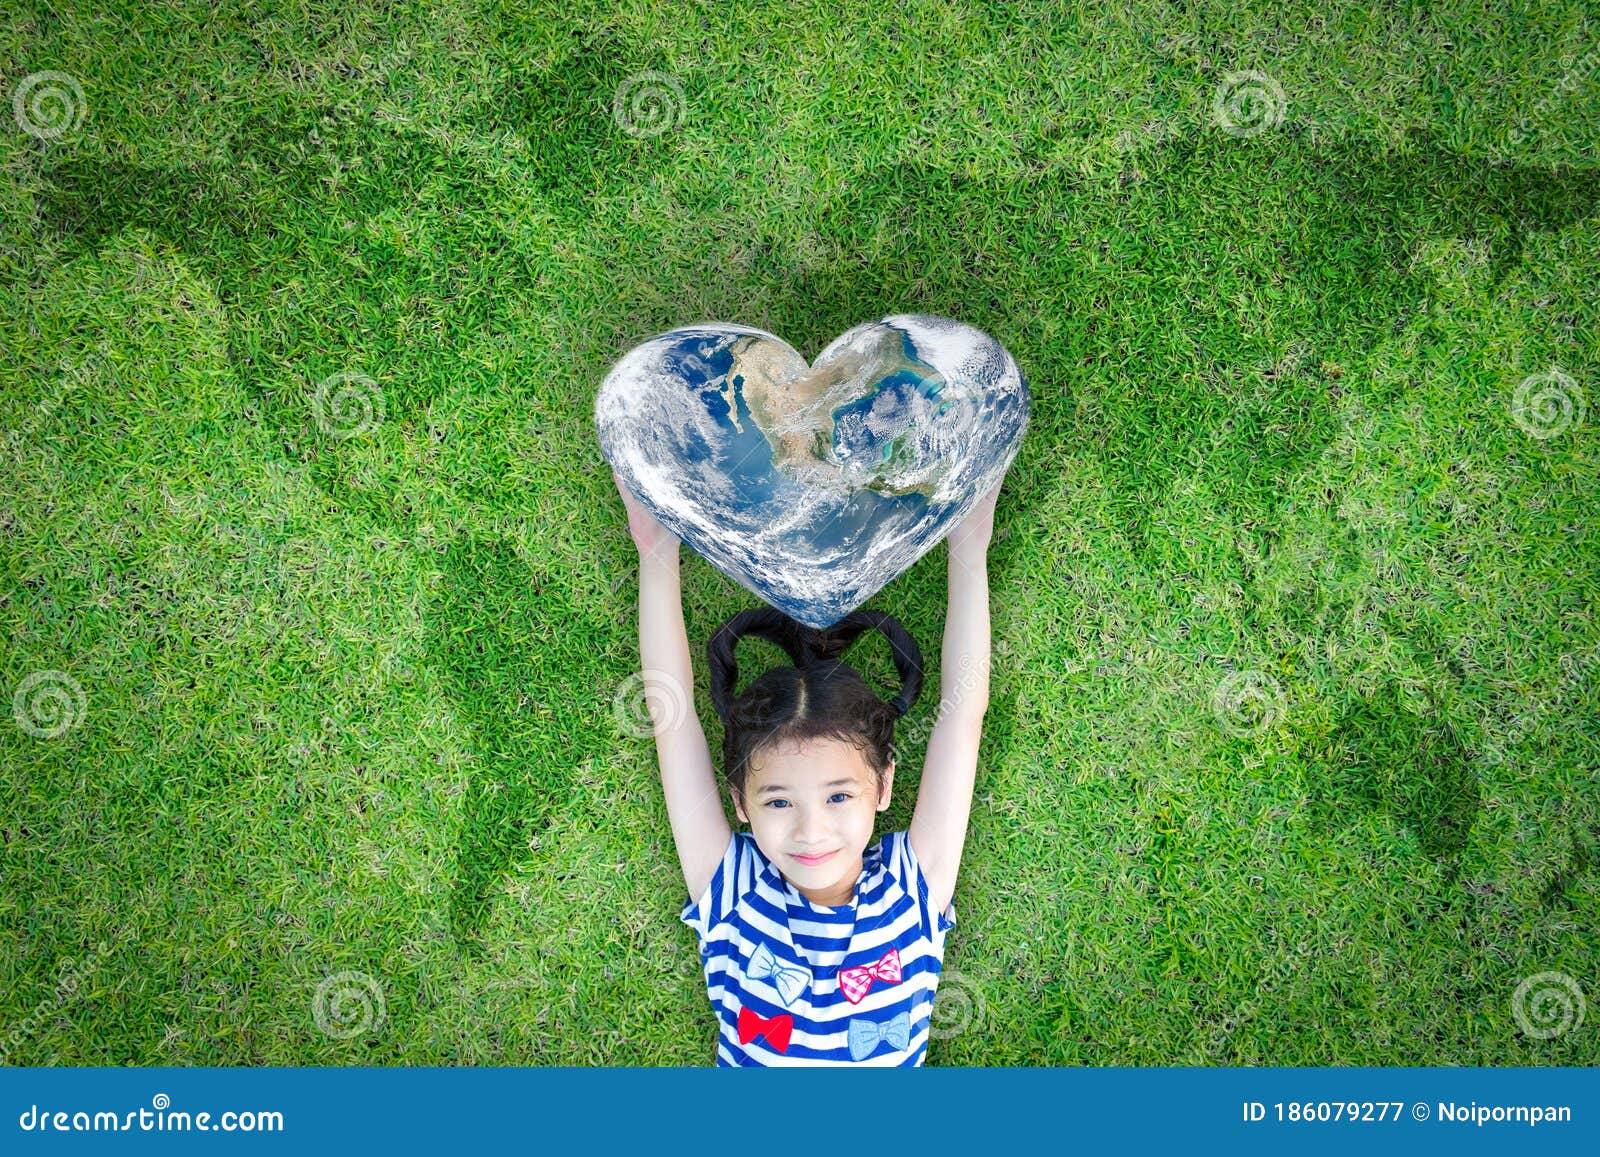 world heart day concept and well being health care campaign with smiling happy kid on eco friendly green lawn.